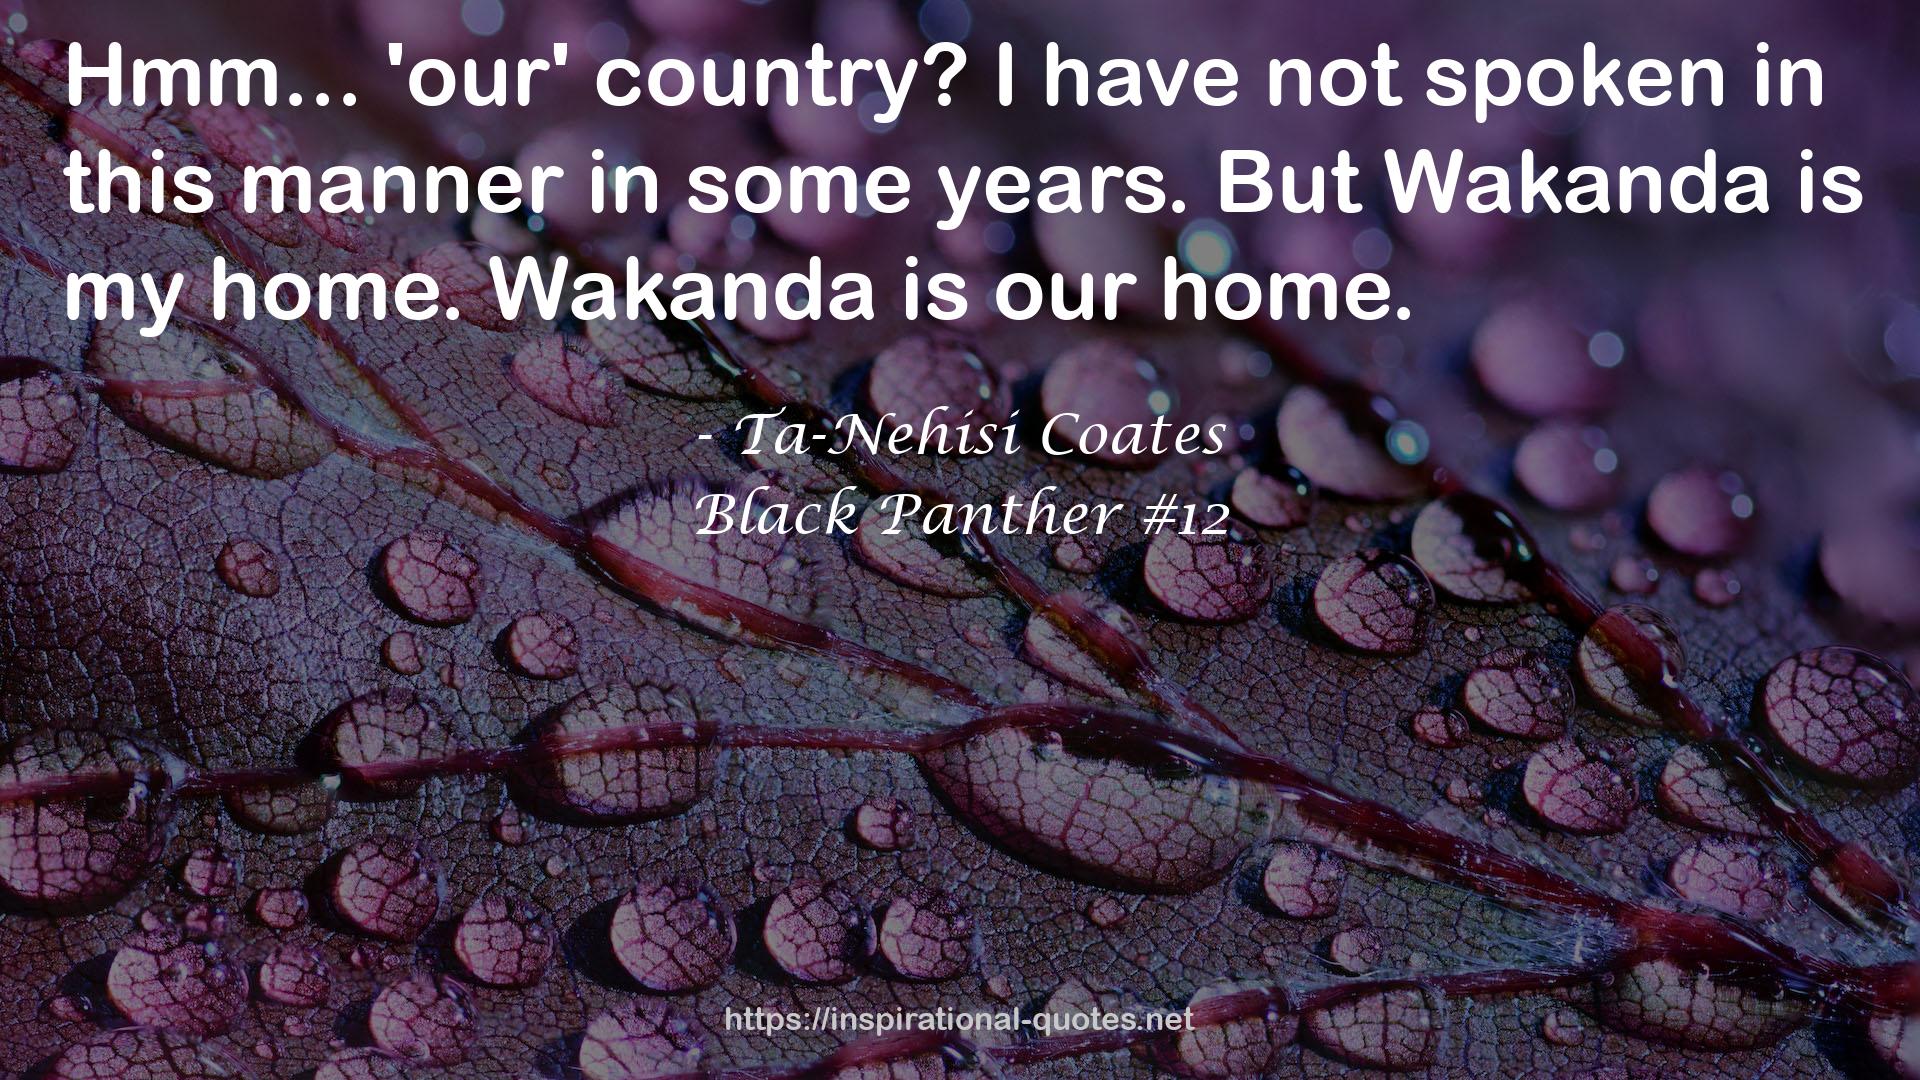 Black Panther #12 QUOTES